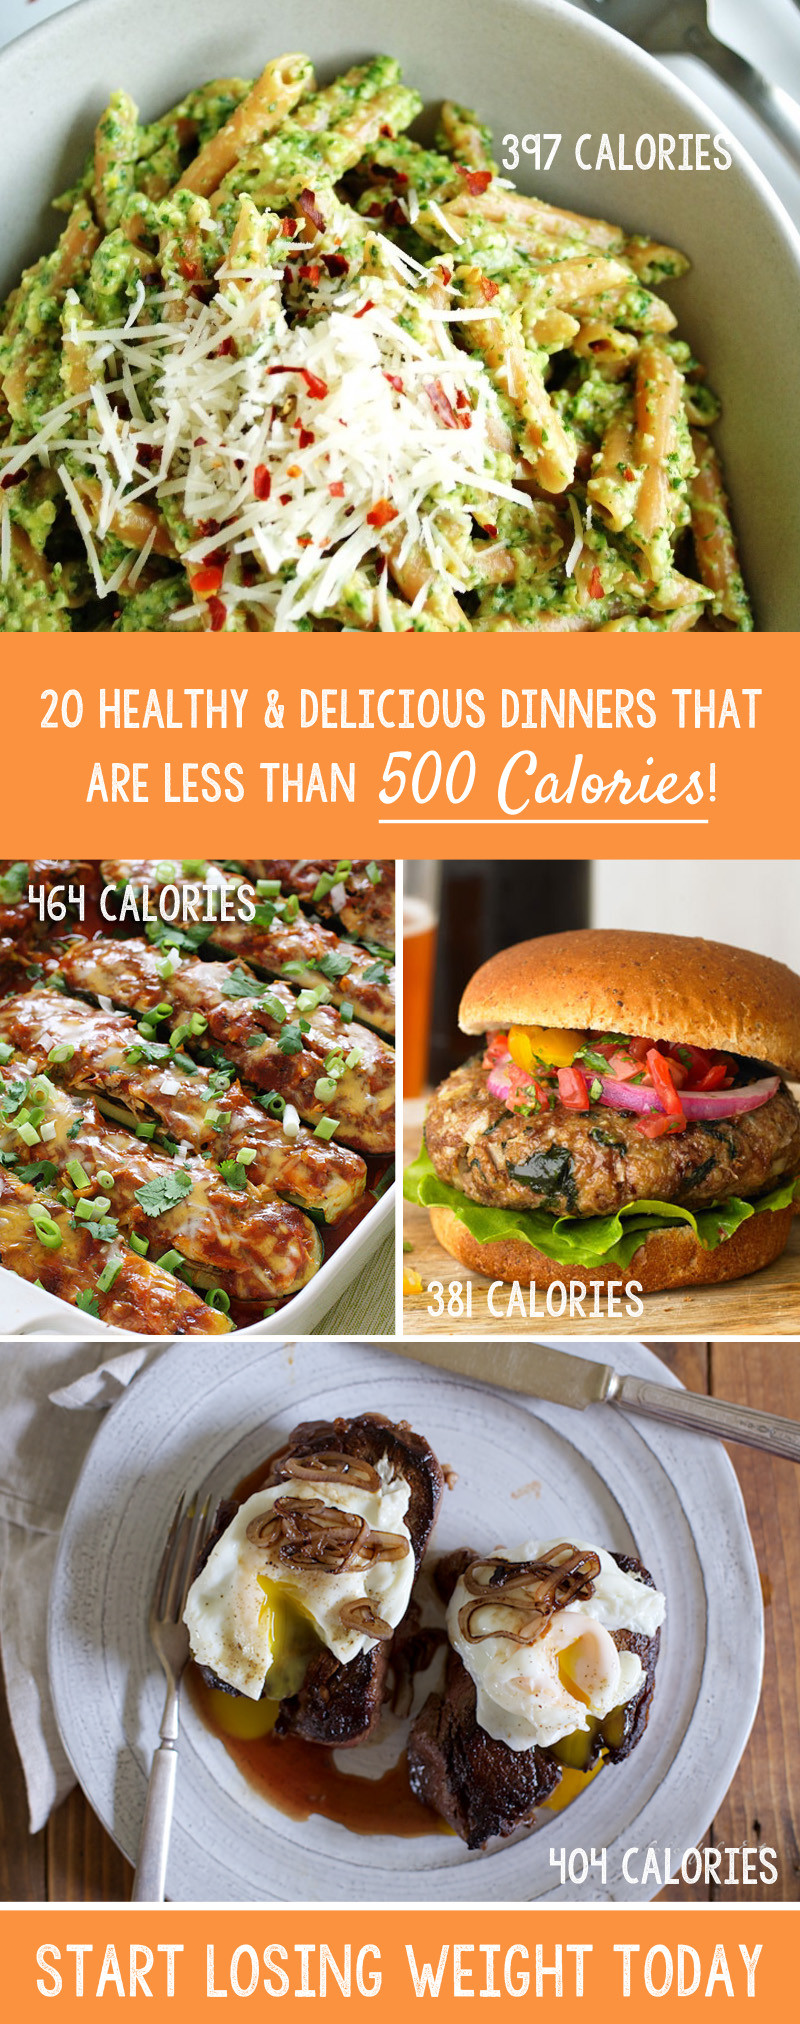 Low Calorie Healthy Dinners
 Low Calorie Specials 20 Healthy & Delicious Dinners Less